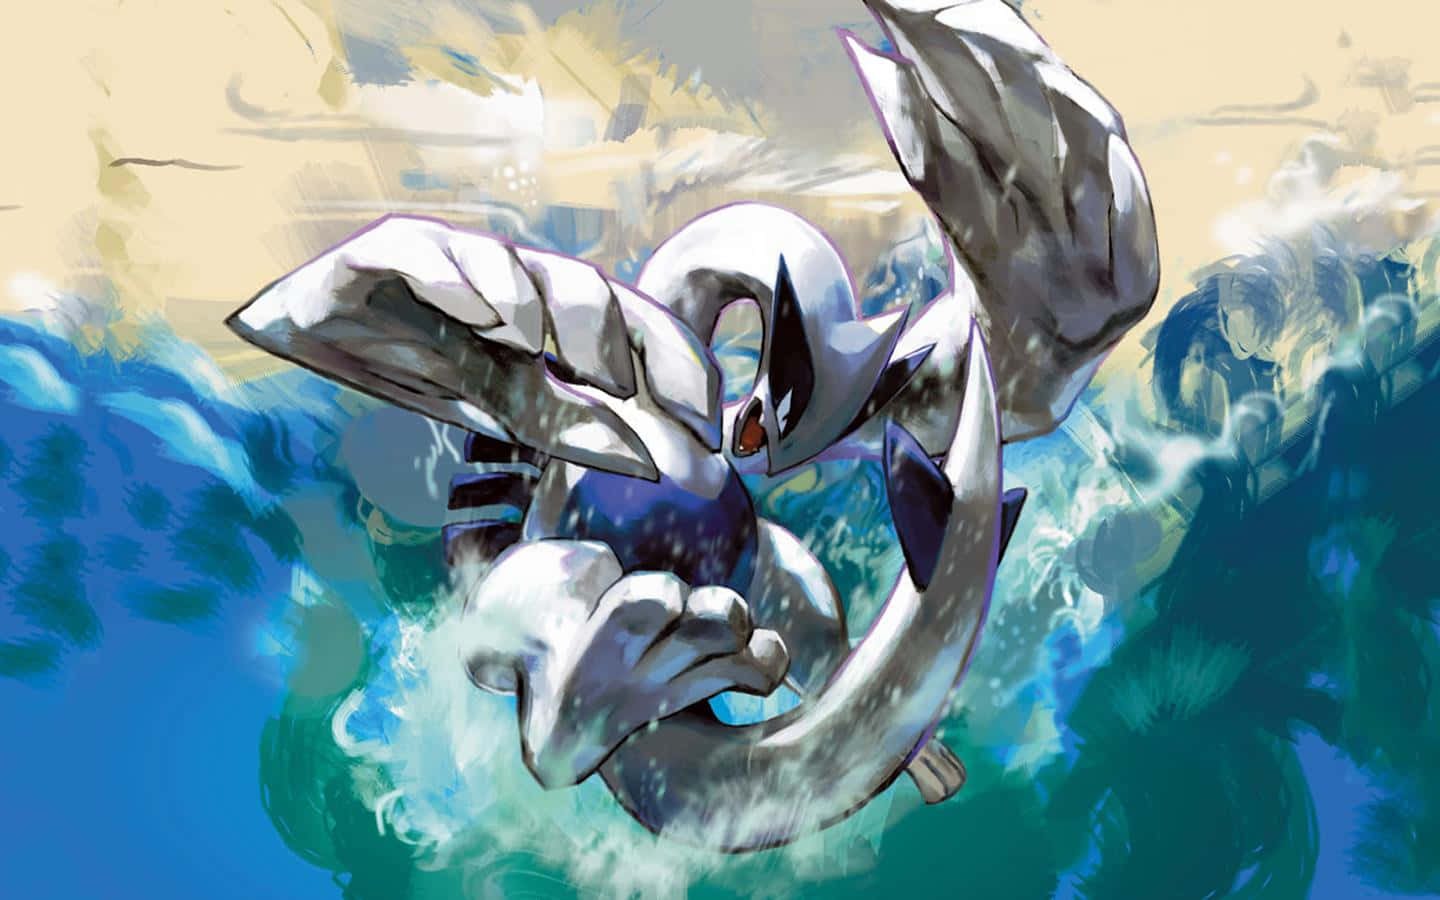 A majestic Lugia soars above the clouds.